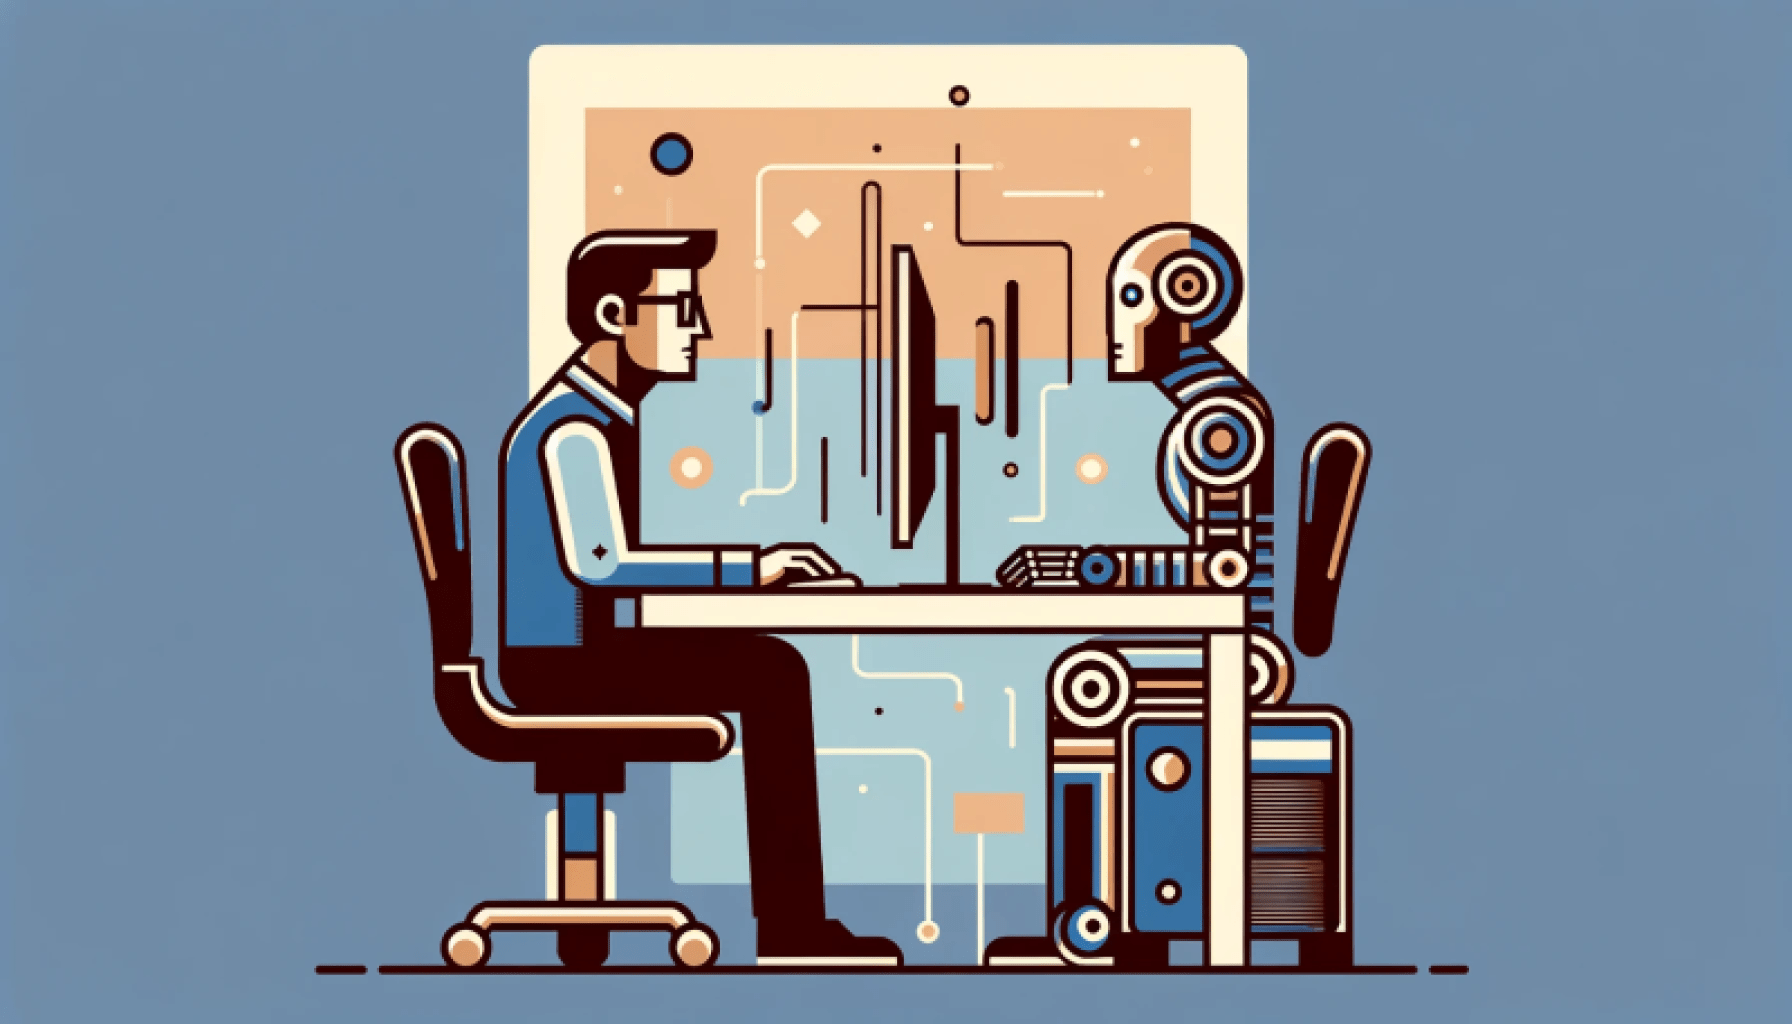 AI generated profile view image of a white collar worker masculine presenting with glasses in sweater vest seated in front of a desktop computer, mirroring him is a humanoid robot in simplified style, blue and brown tones.